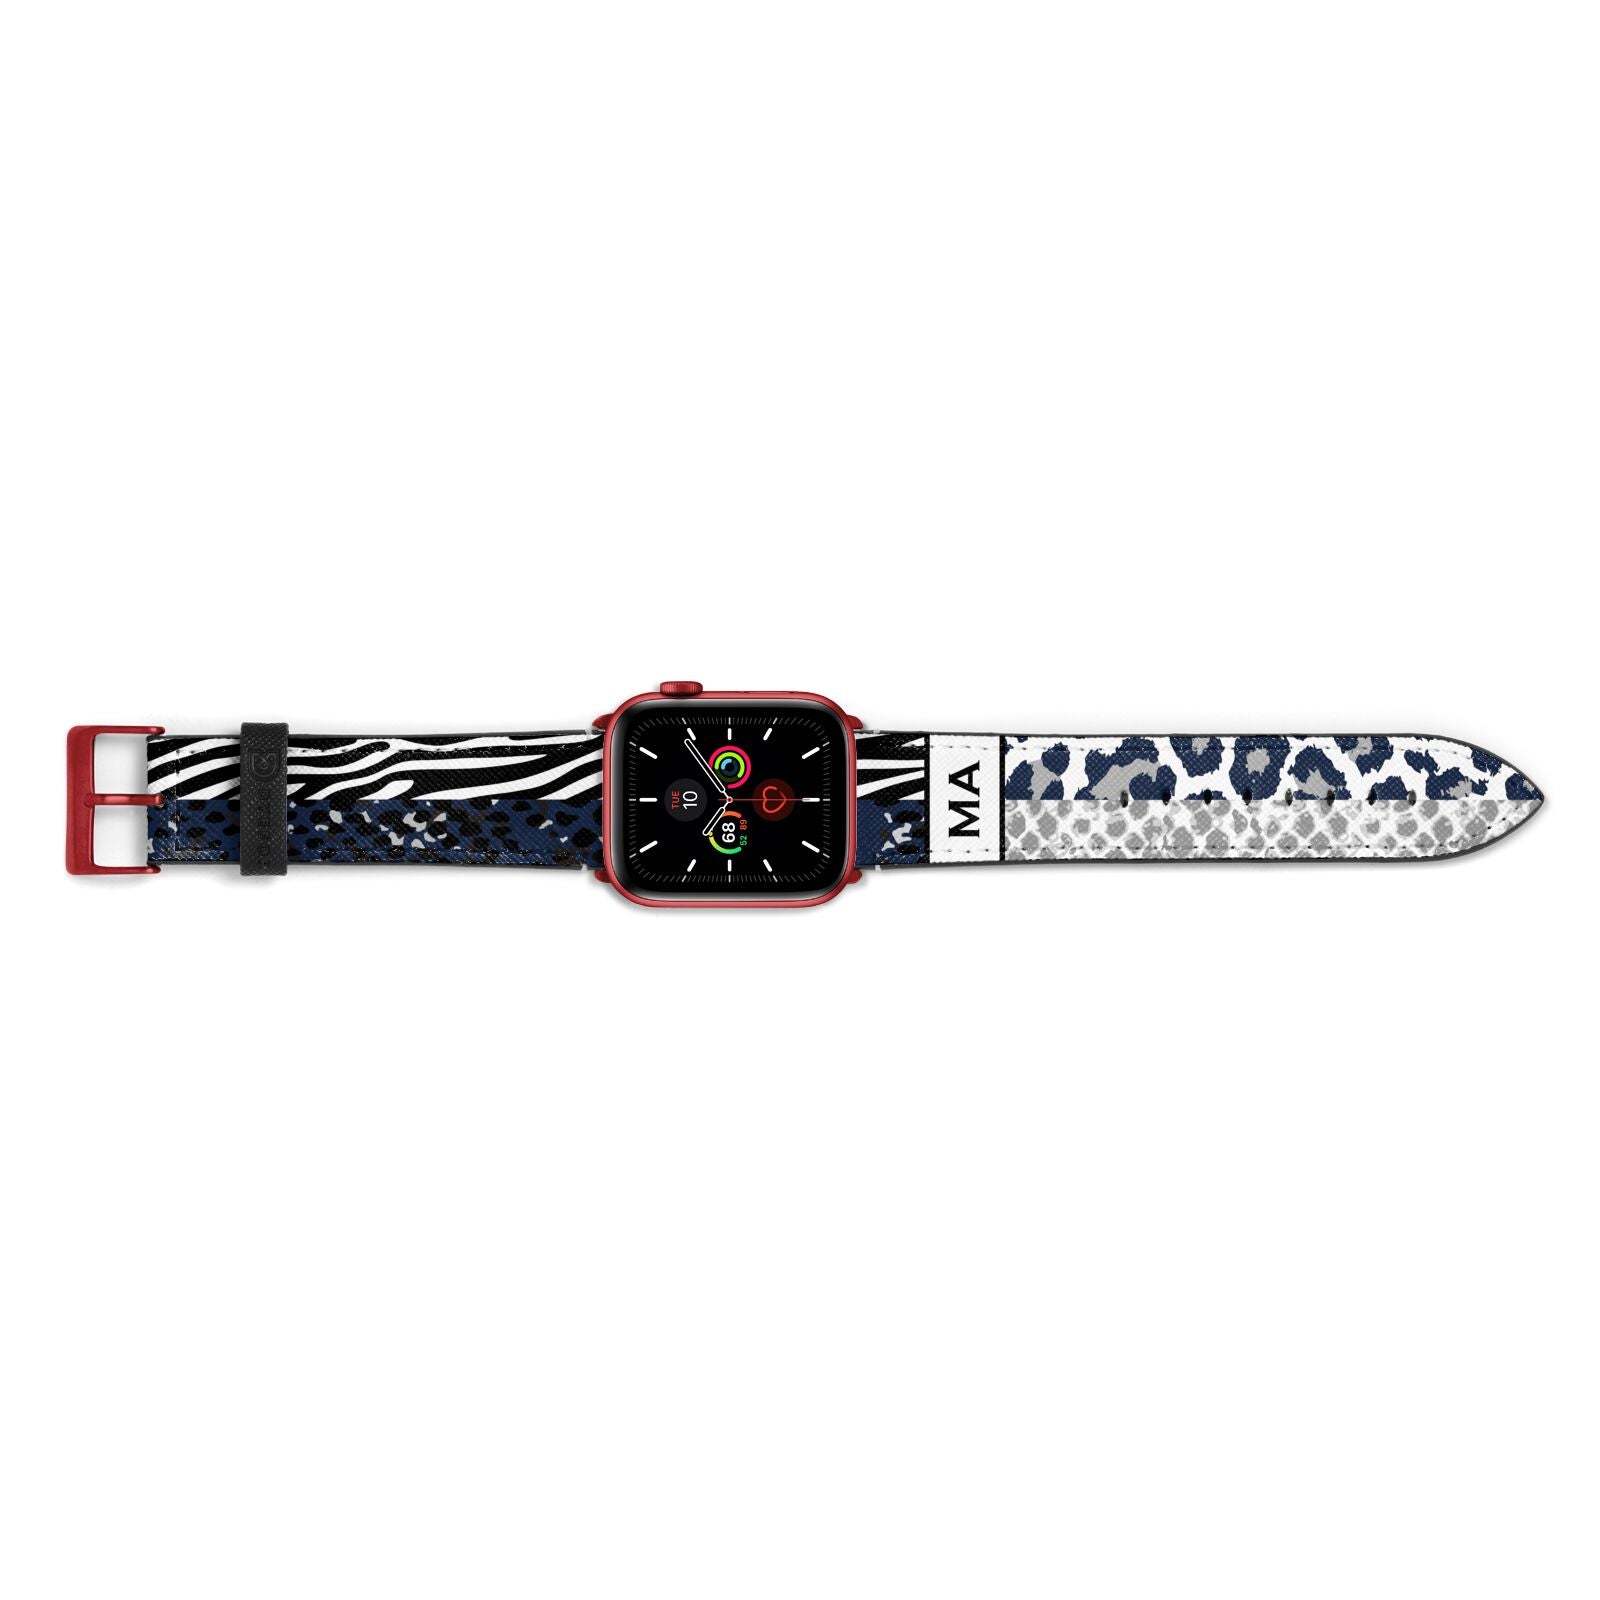 Personalised Animal Print Apple Watch Strap Landscape Image Red Hardware